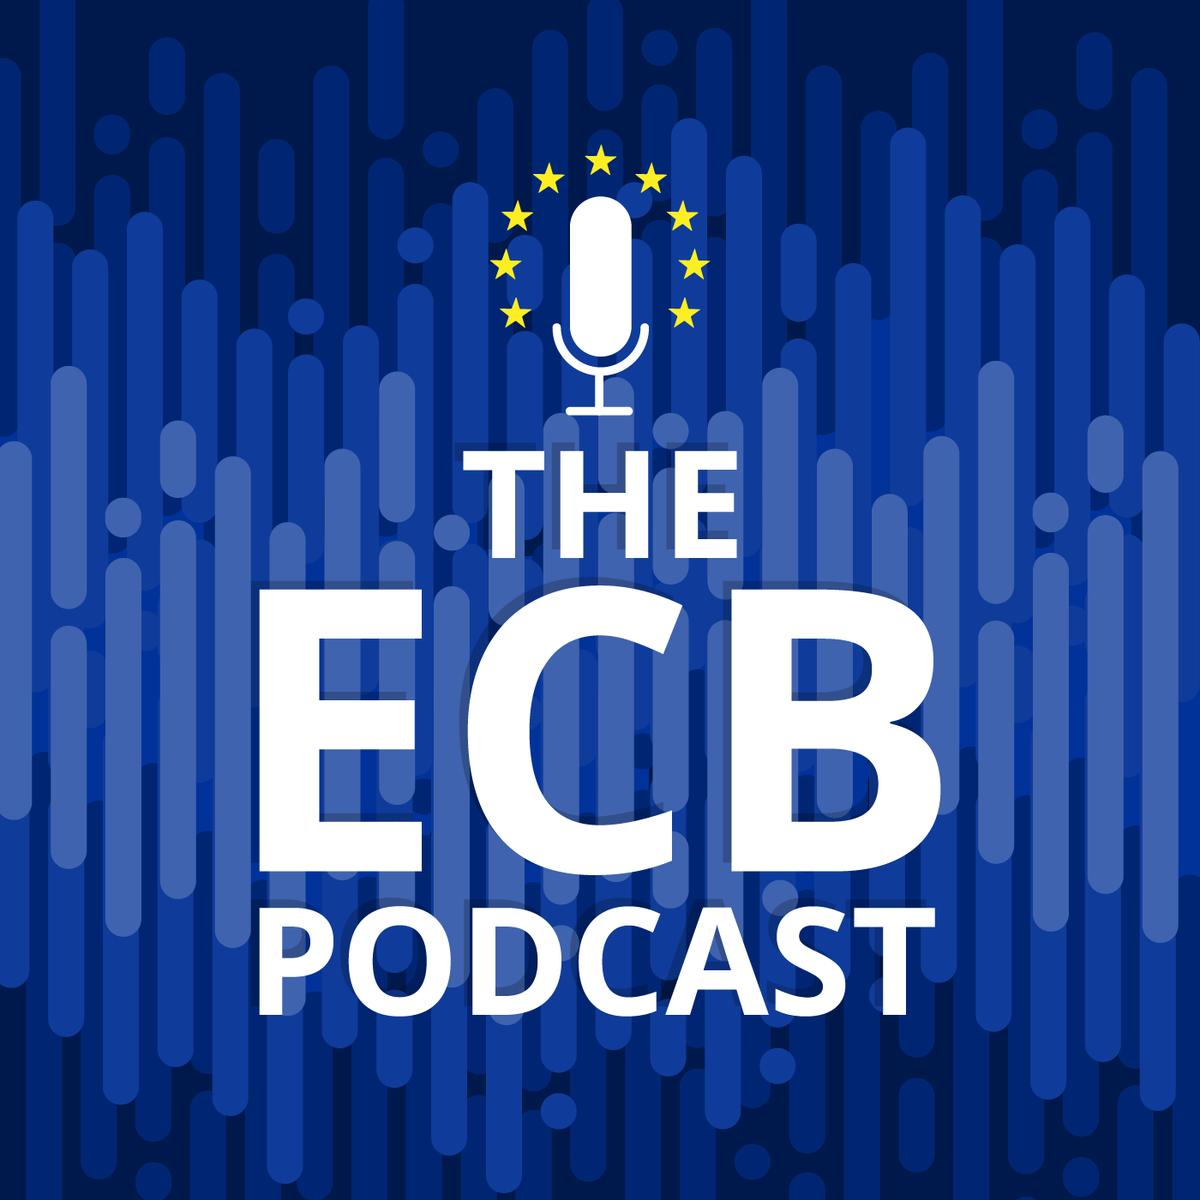 Are you a podcast fan? Want to learn more about central banking and economics?

Then add #TheECBPodcast to your summer listening list. Episodes cover a wide range of topics – from inflation and climate change to female economic empowerment pod.link/1481819425